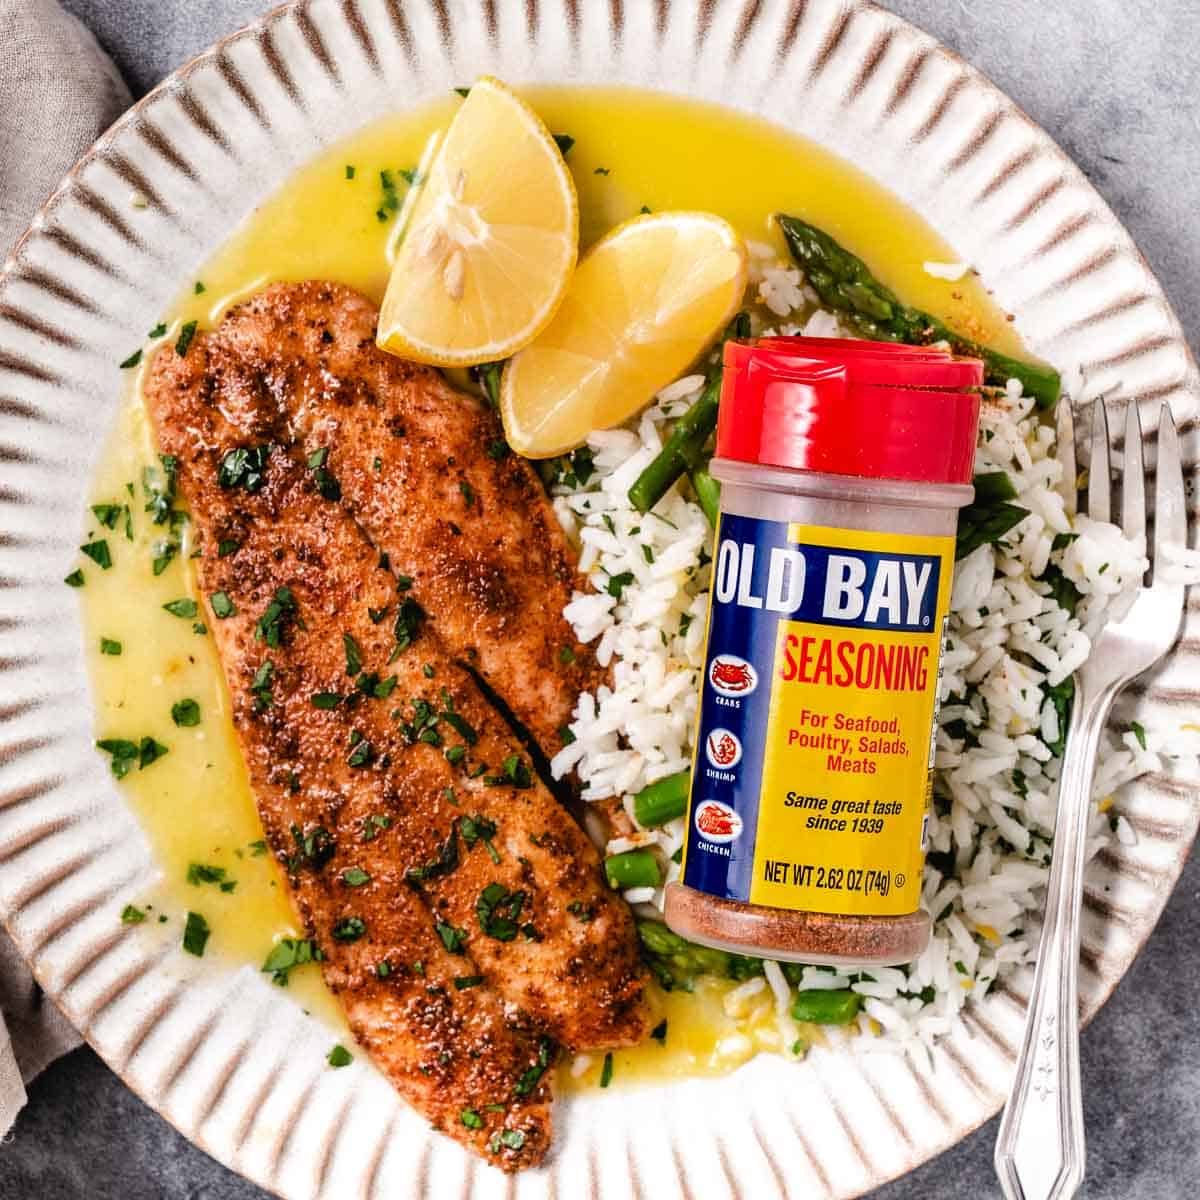 Yellowtail snapper fish with Old Bay seasoning.